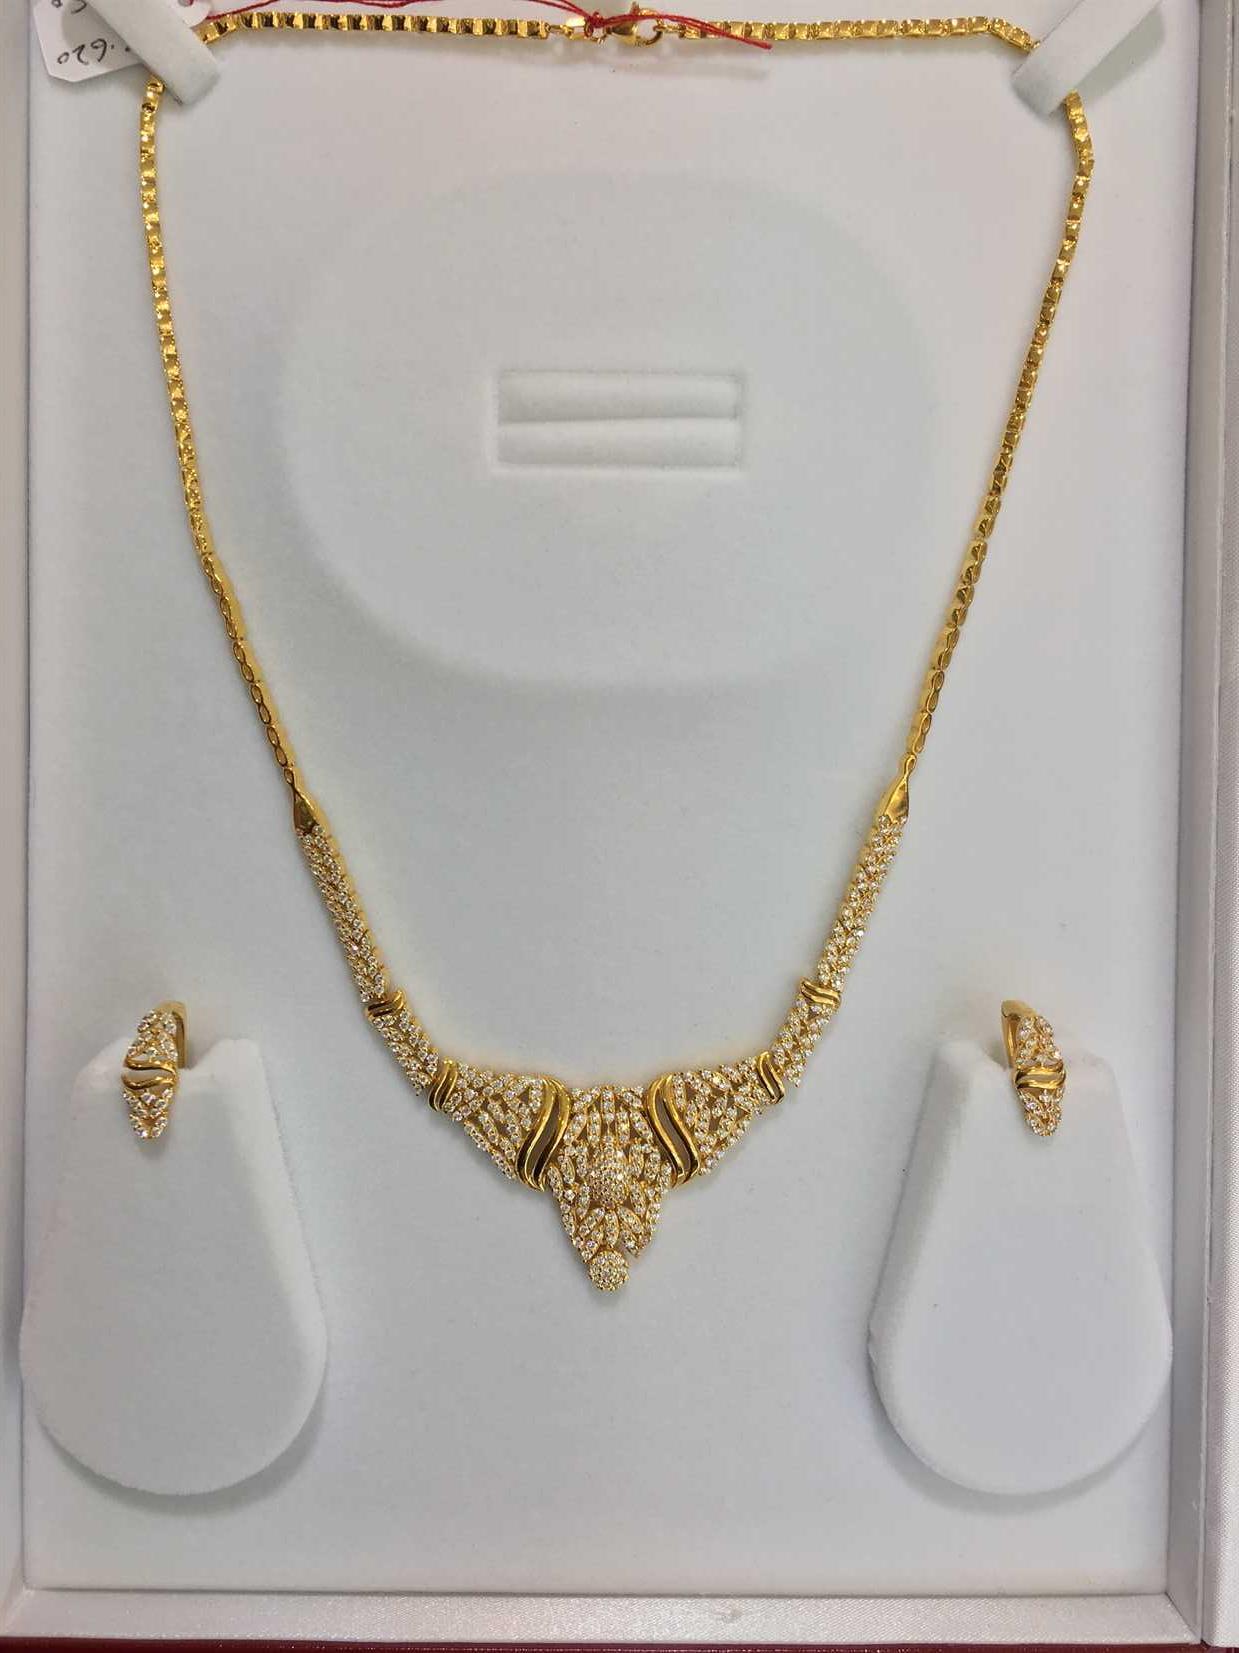 22ct Gold Designer Necklace set with American Diamonds